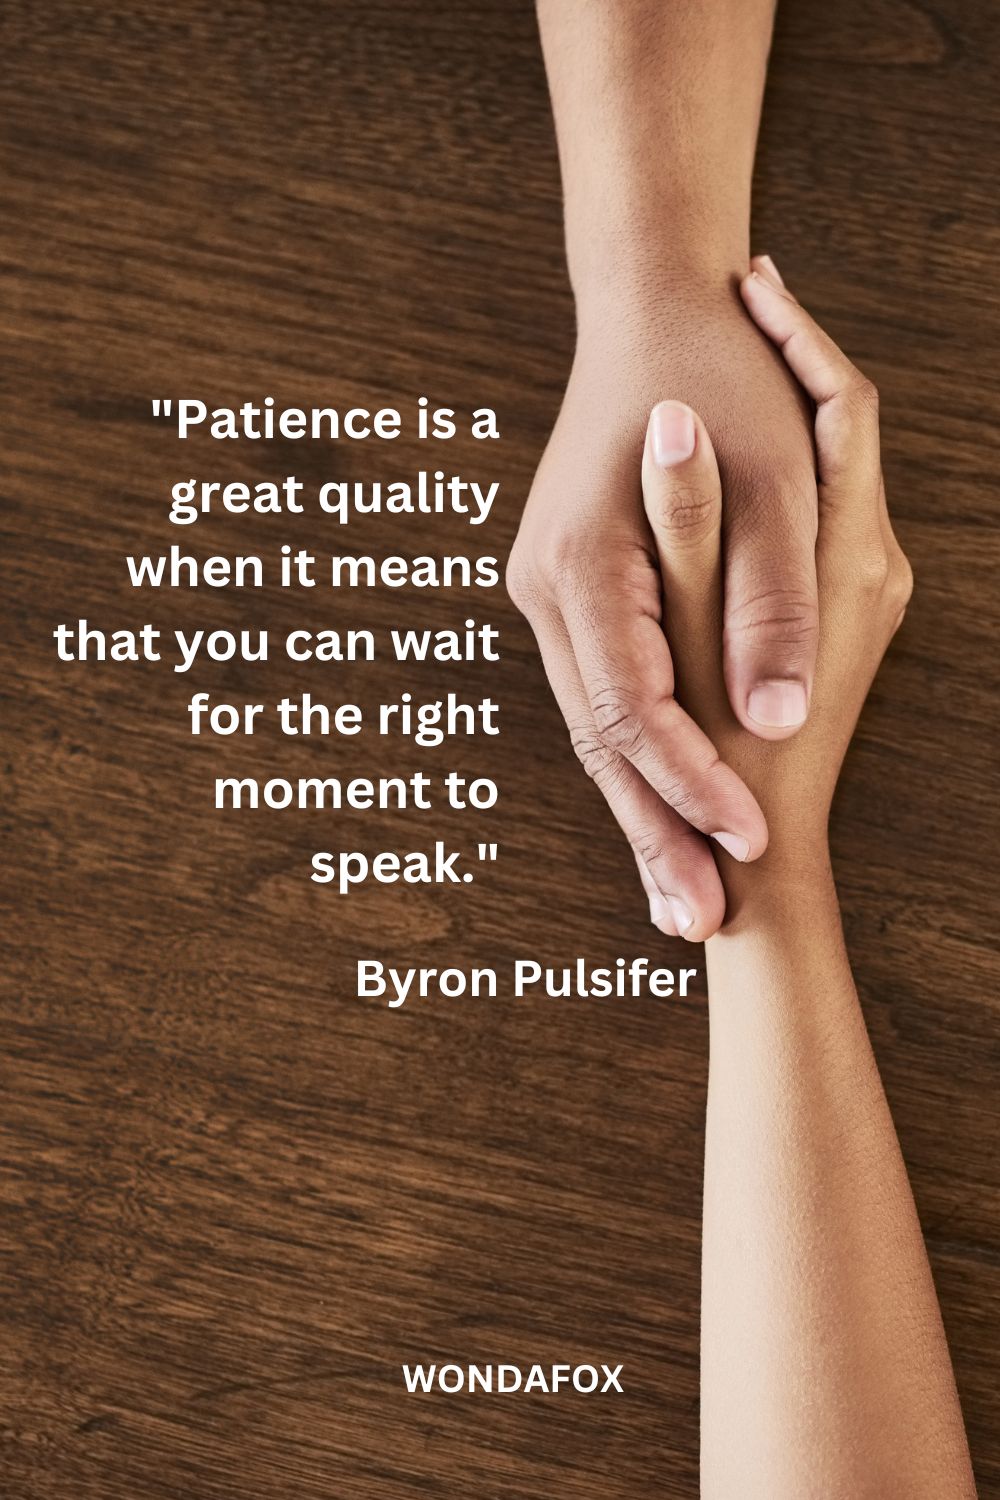 "Patience is a great quality when it means that you can wait for the right moment to speak."
Byron Pulsifer